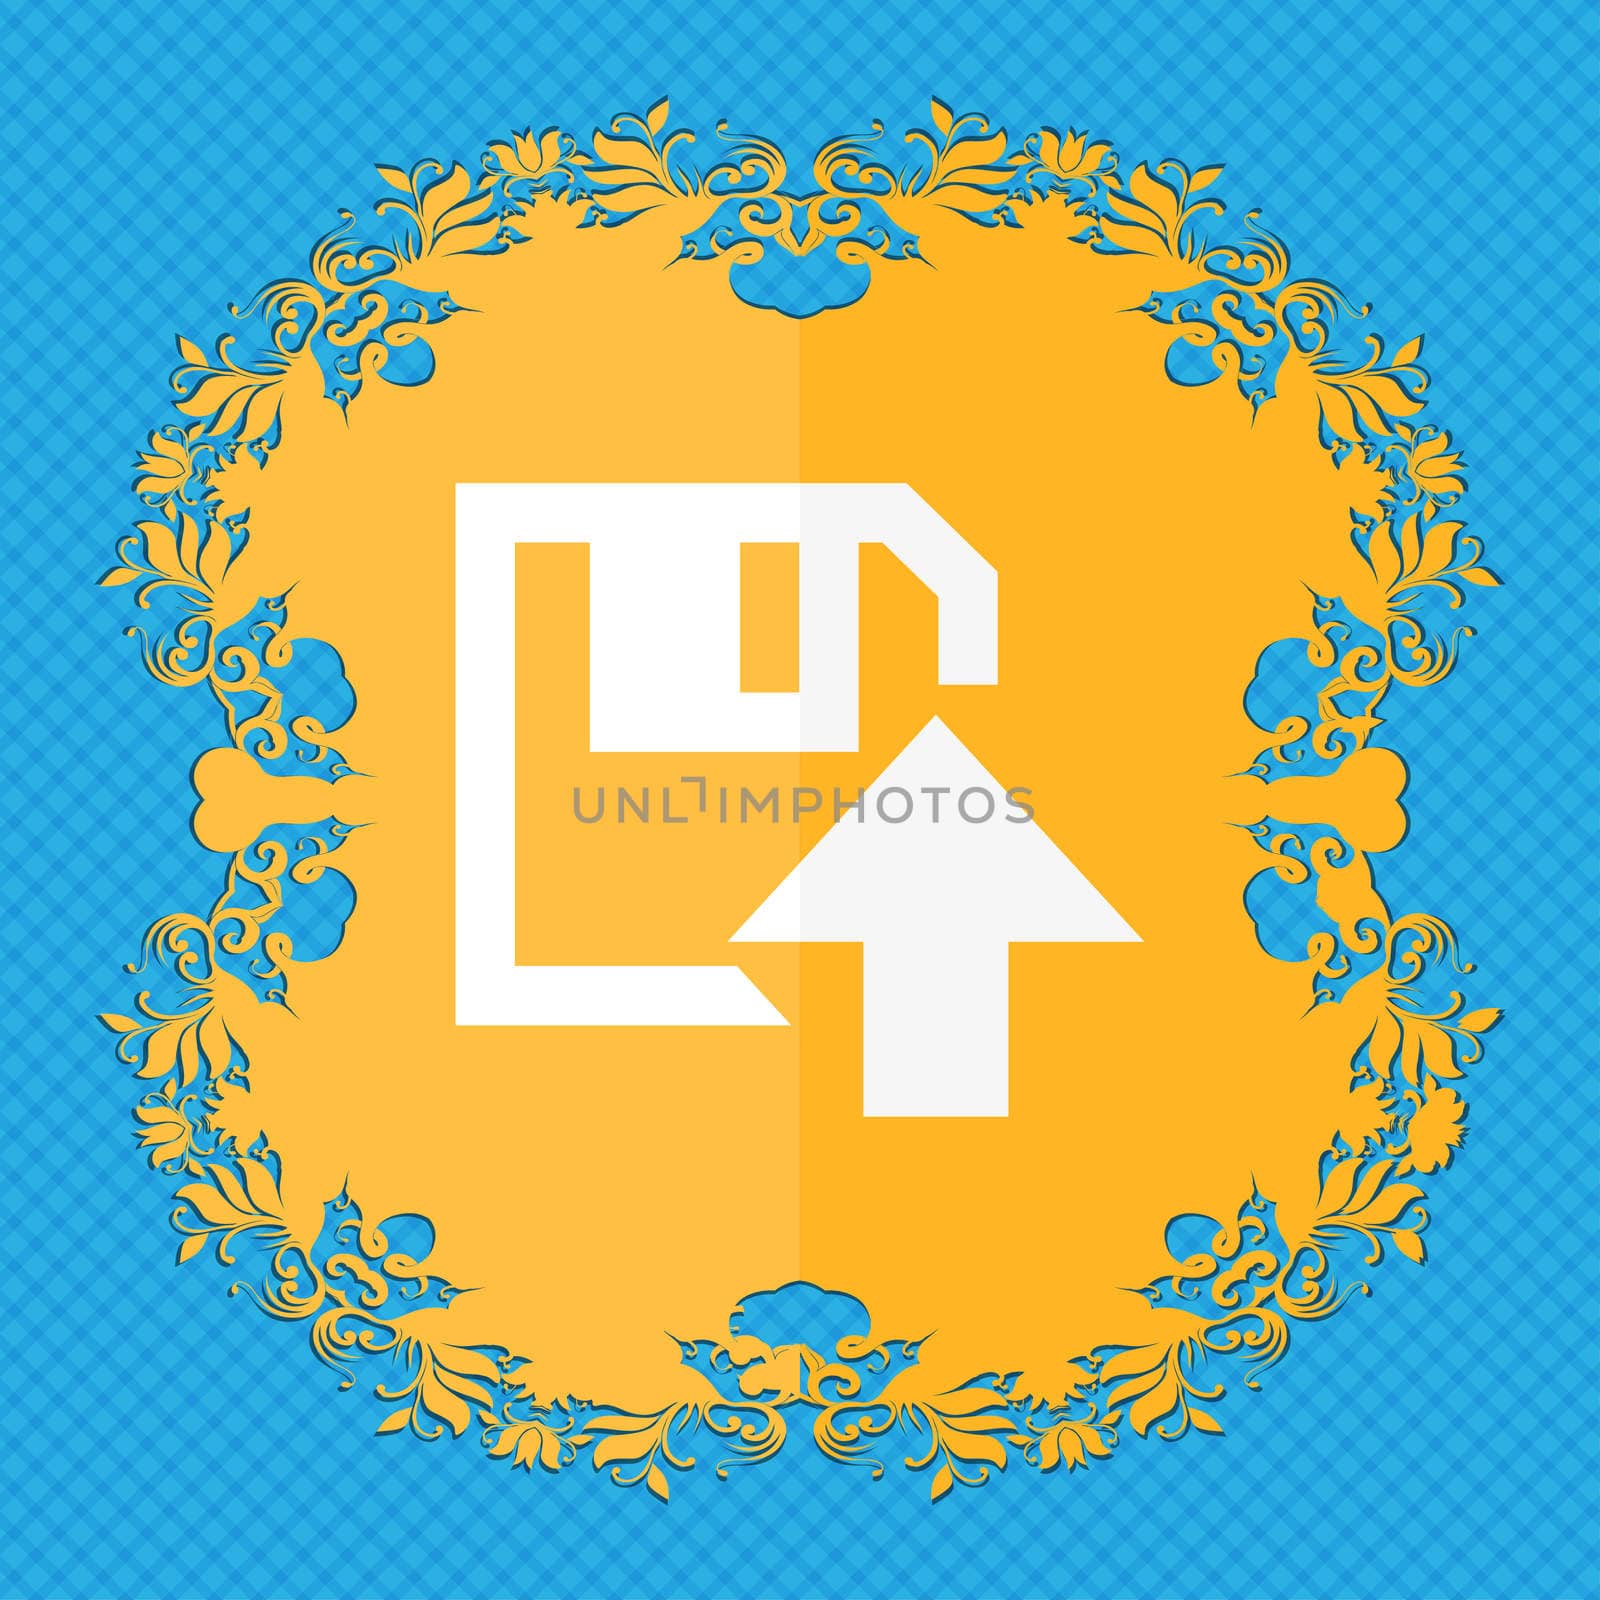 floppy icon. Flat modern design. Floral flat design on a blue abstract background with place for your text. illustration